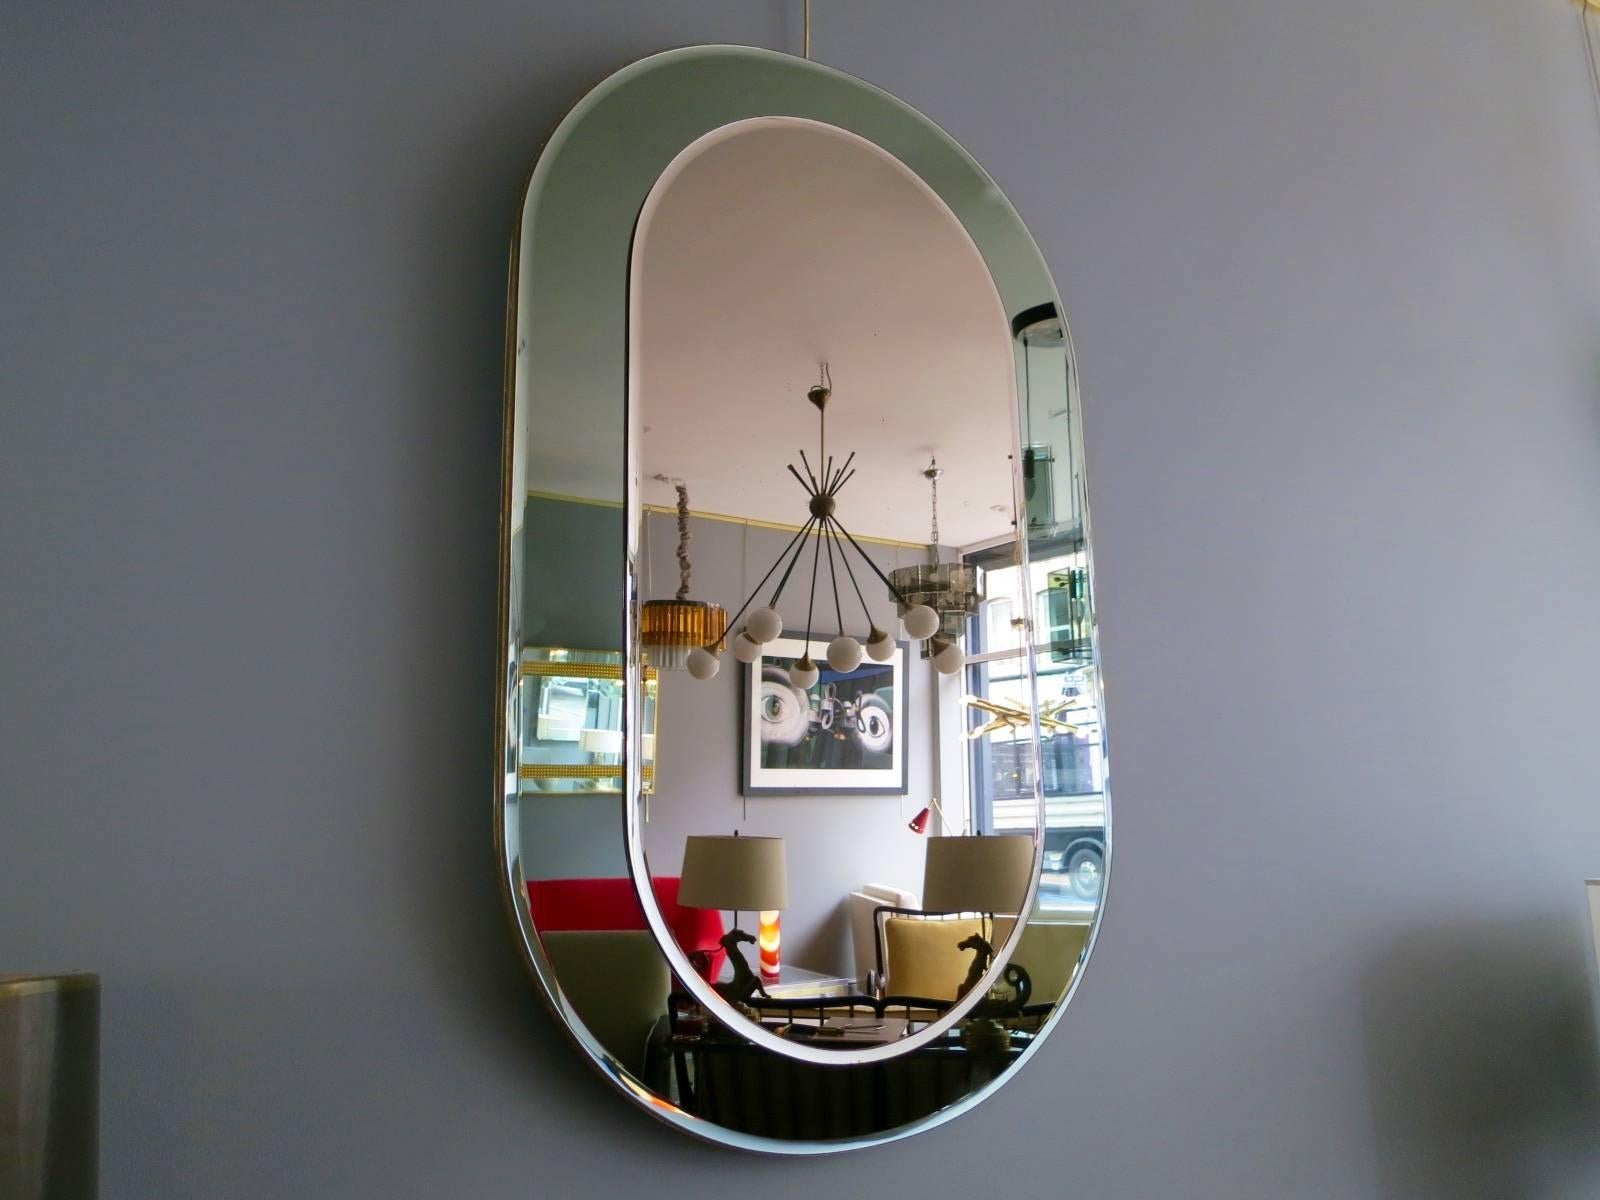 An Italian green glass beveled bordered mirror, with bronze tint beveled mirror panel. Can be hung portrait or landscape,

circa 1950s.

Measures: 115 cm x 72 cm.